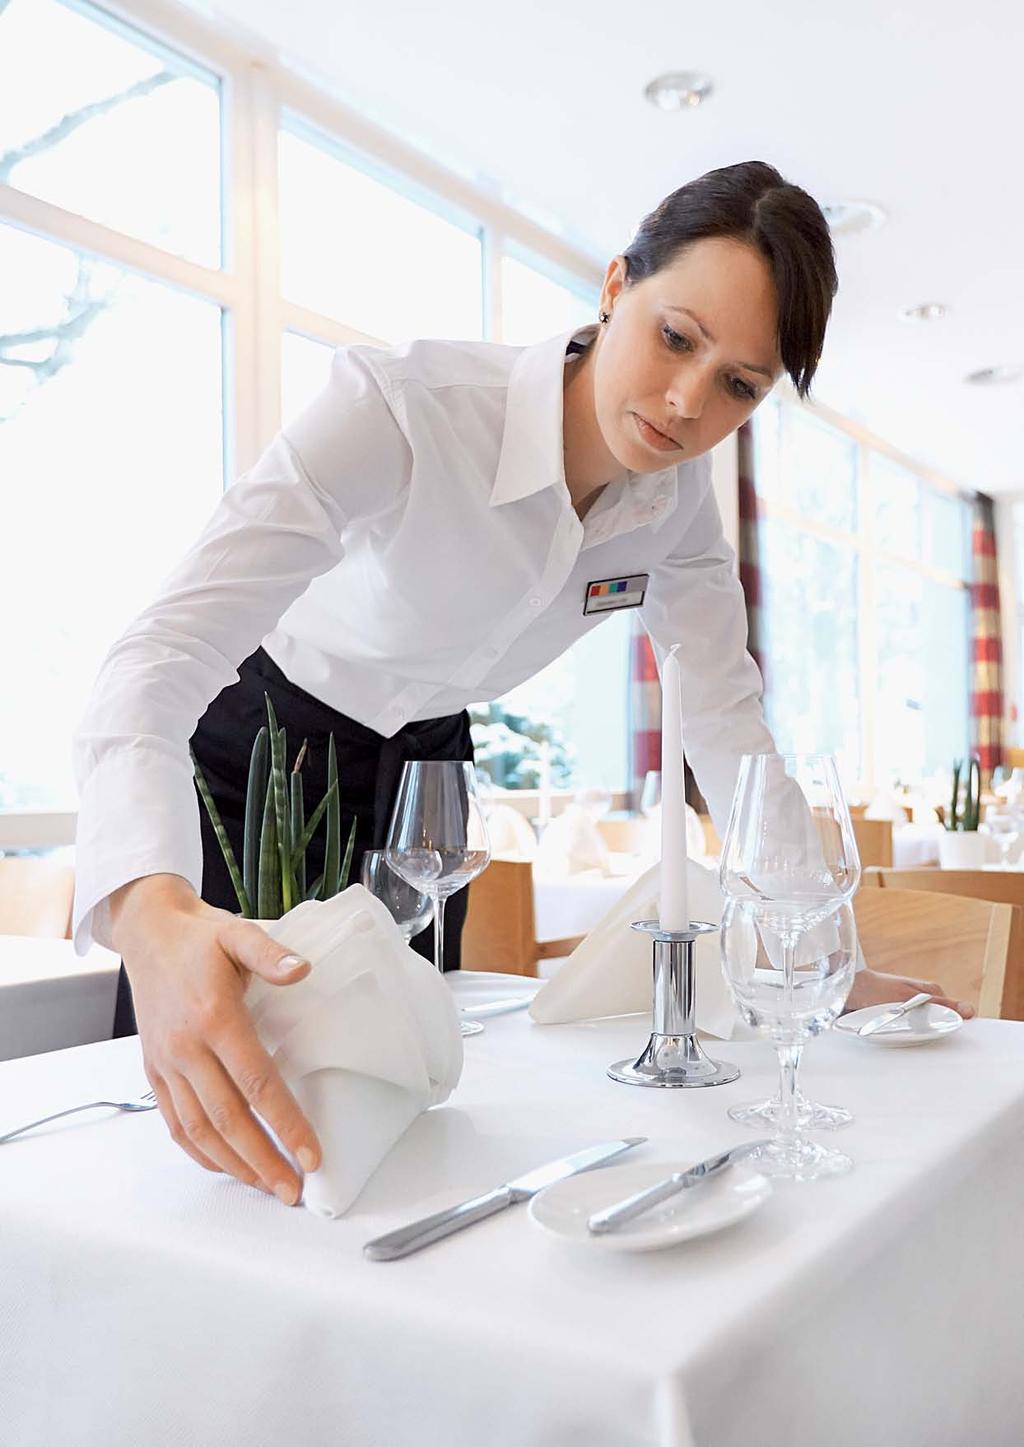 Excellent cleaning performance on crockery, glassware, cutlery and other utensils 'In our hotel, the Miele dishwasher produces a spotless finish several times a day.